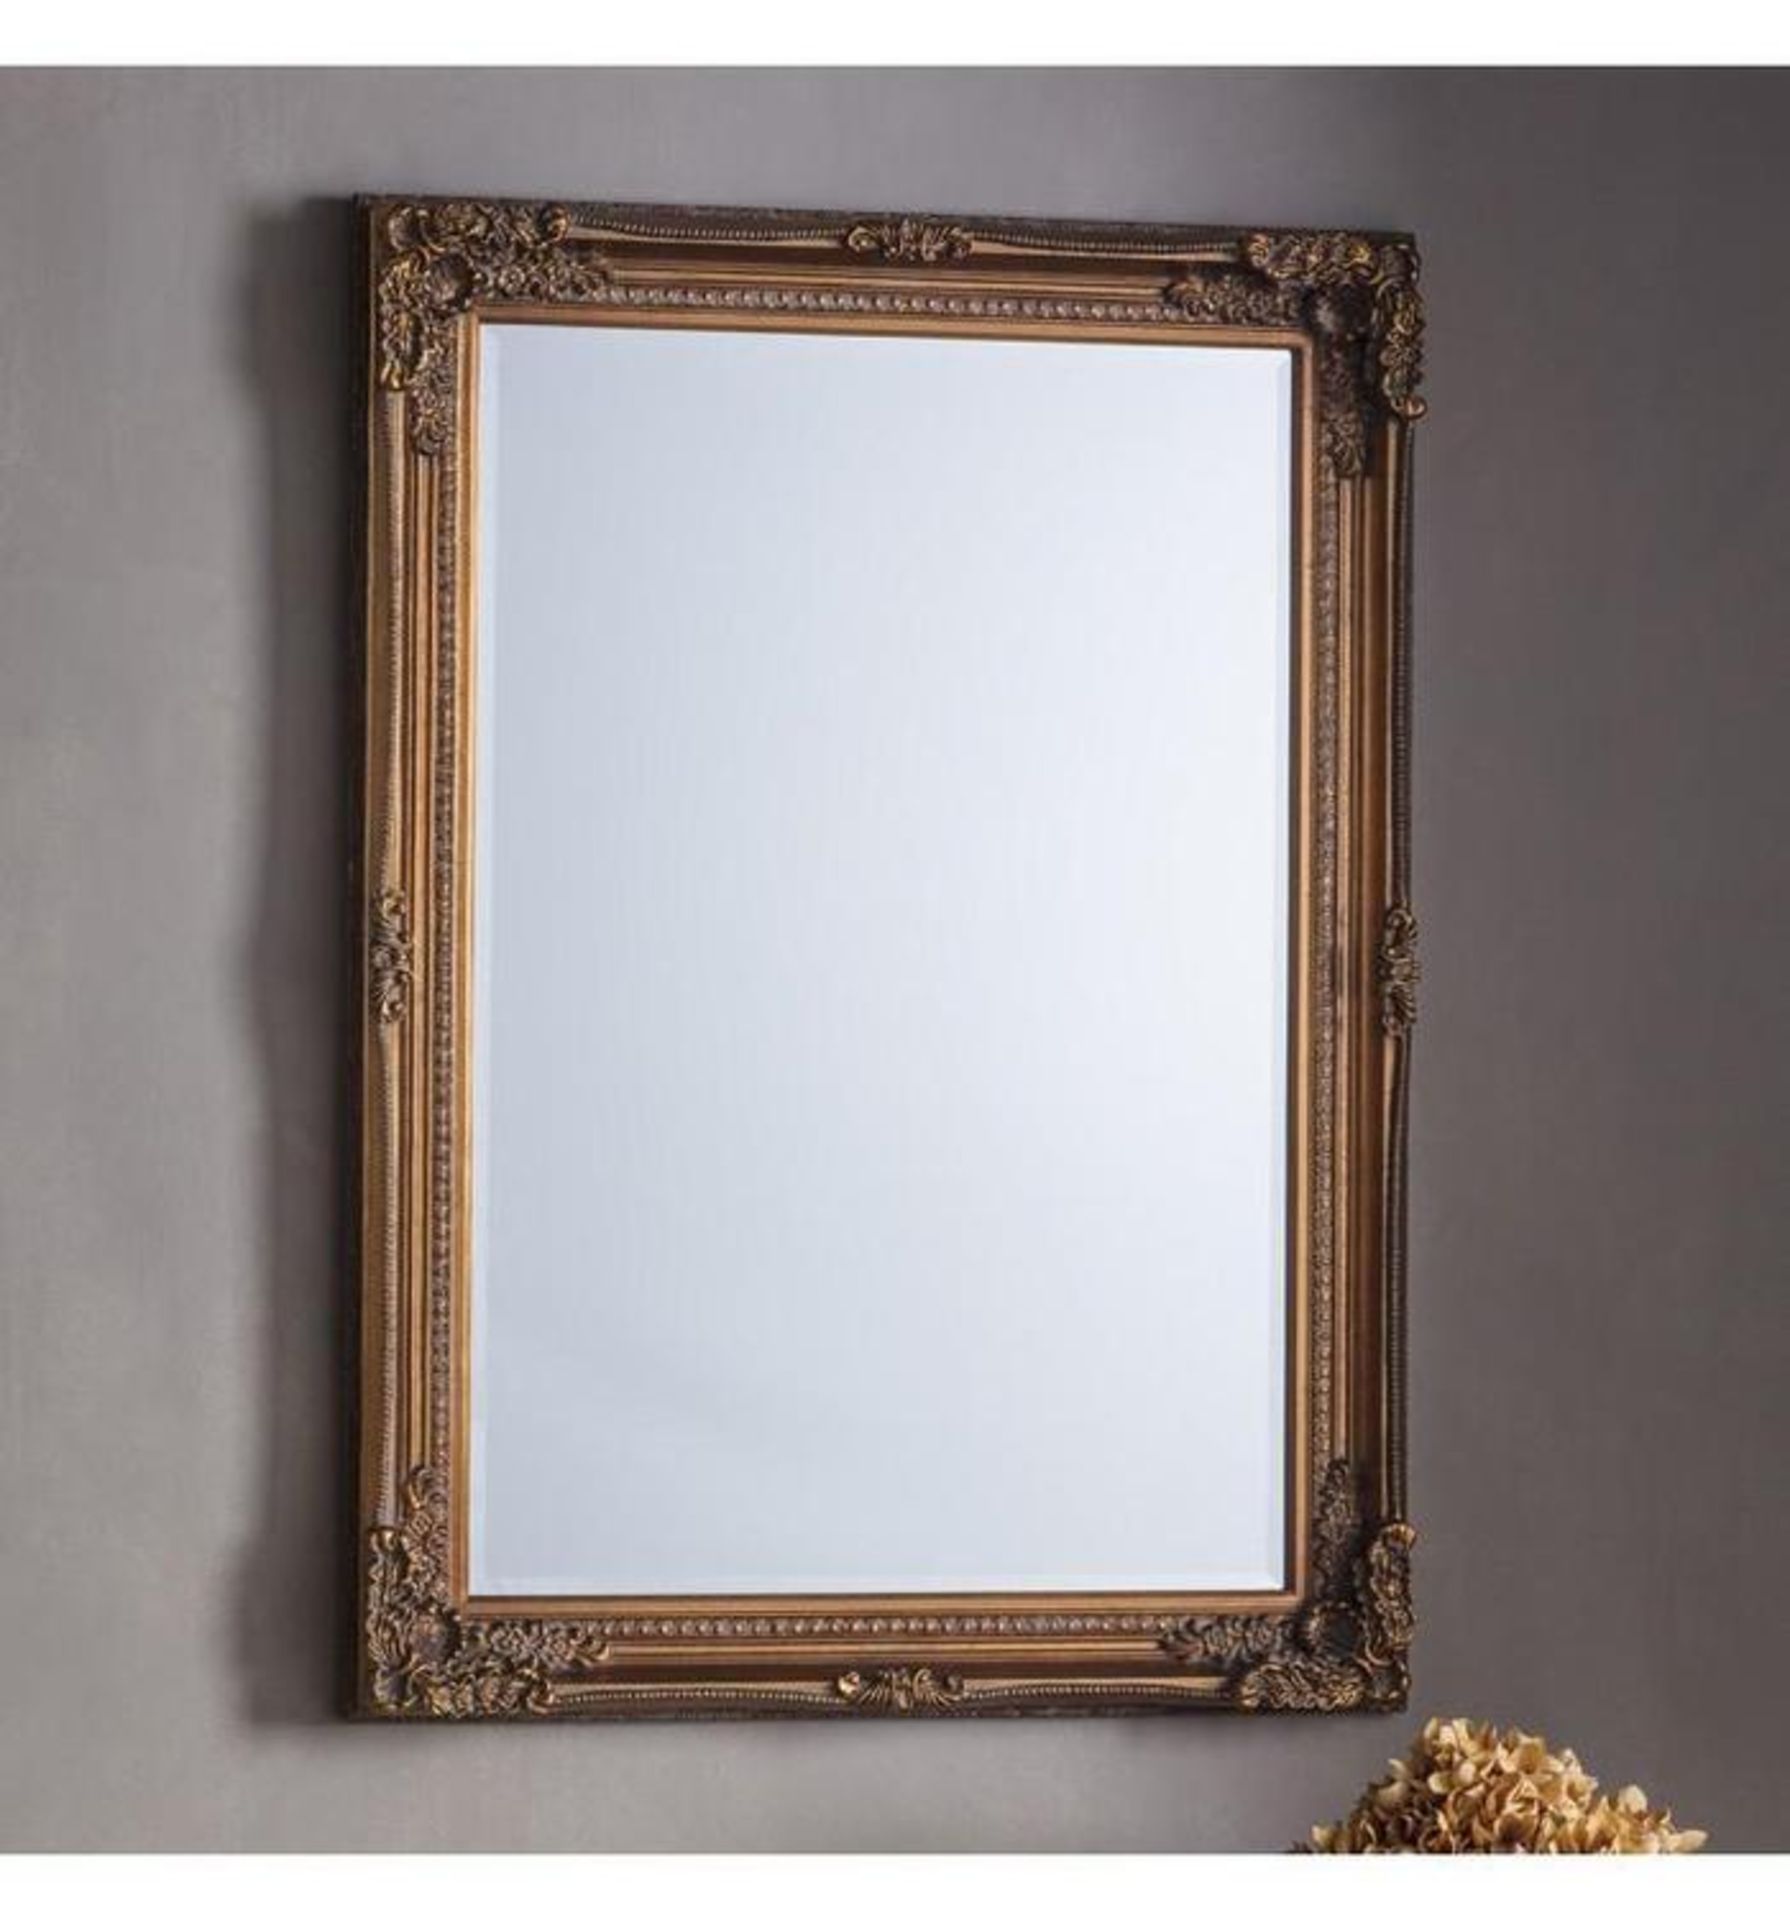 Rushden Bronze Rectangle Mirror An Ornate Baroque Inspired Wall Mirror In An Aged Bronze Finish